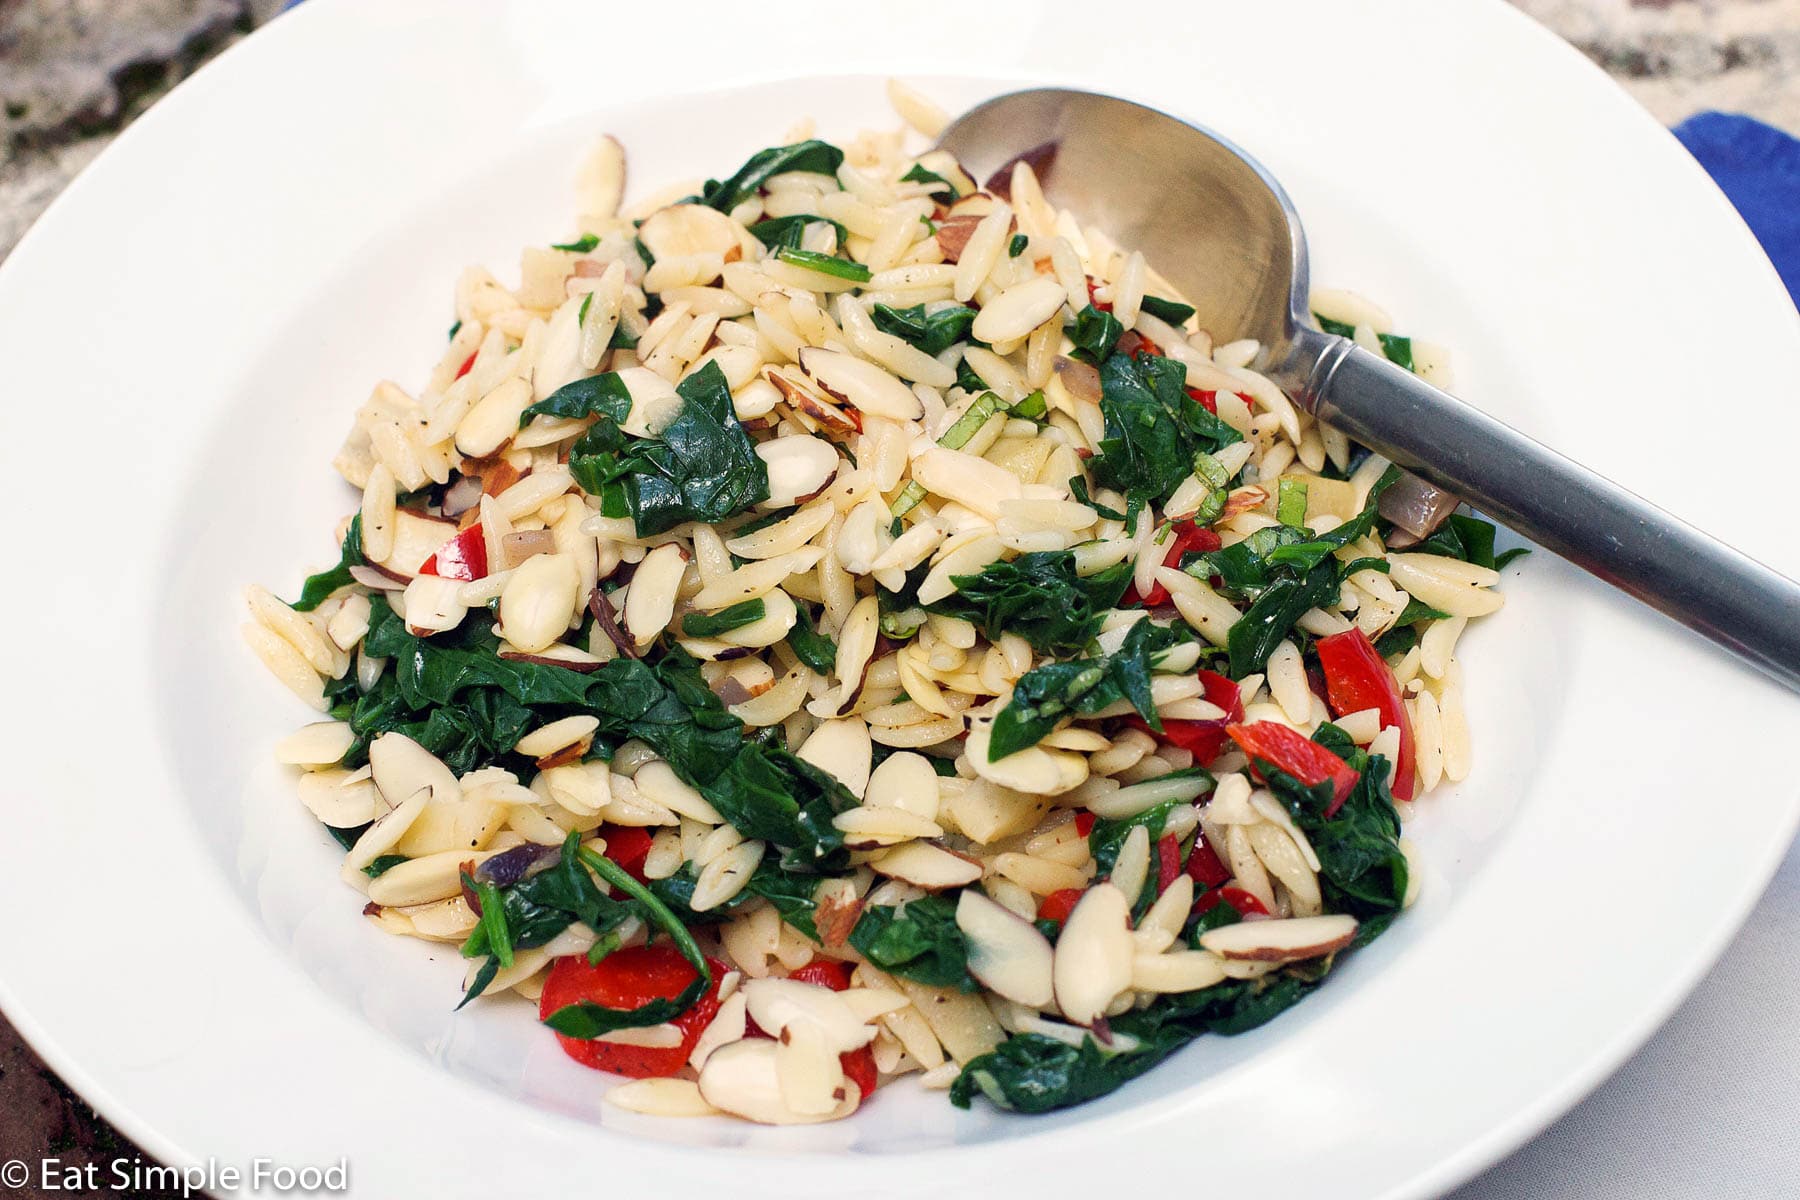 White bowl of orzo salad with diced artichoke hearts, red onions, red bell peppers with willted spinach. Silver spoon in the bowl.